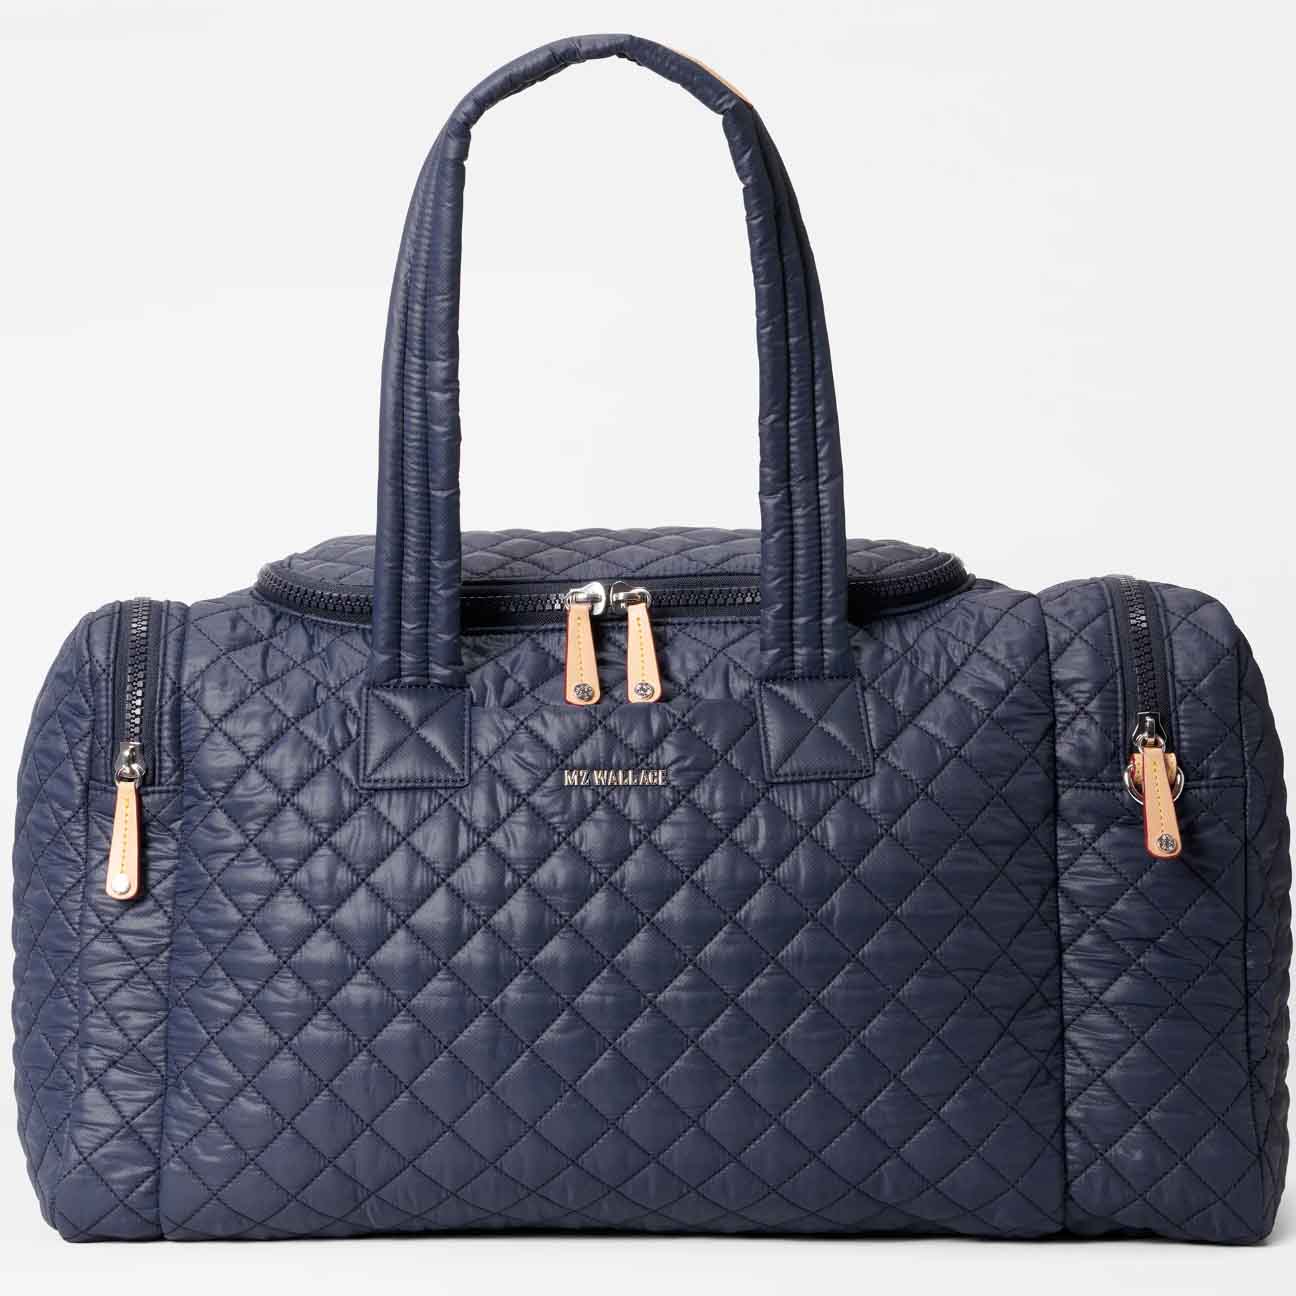 Dark blue duffle bag with gold zippers